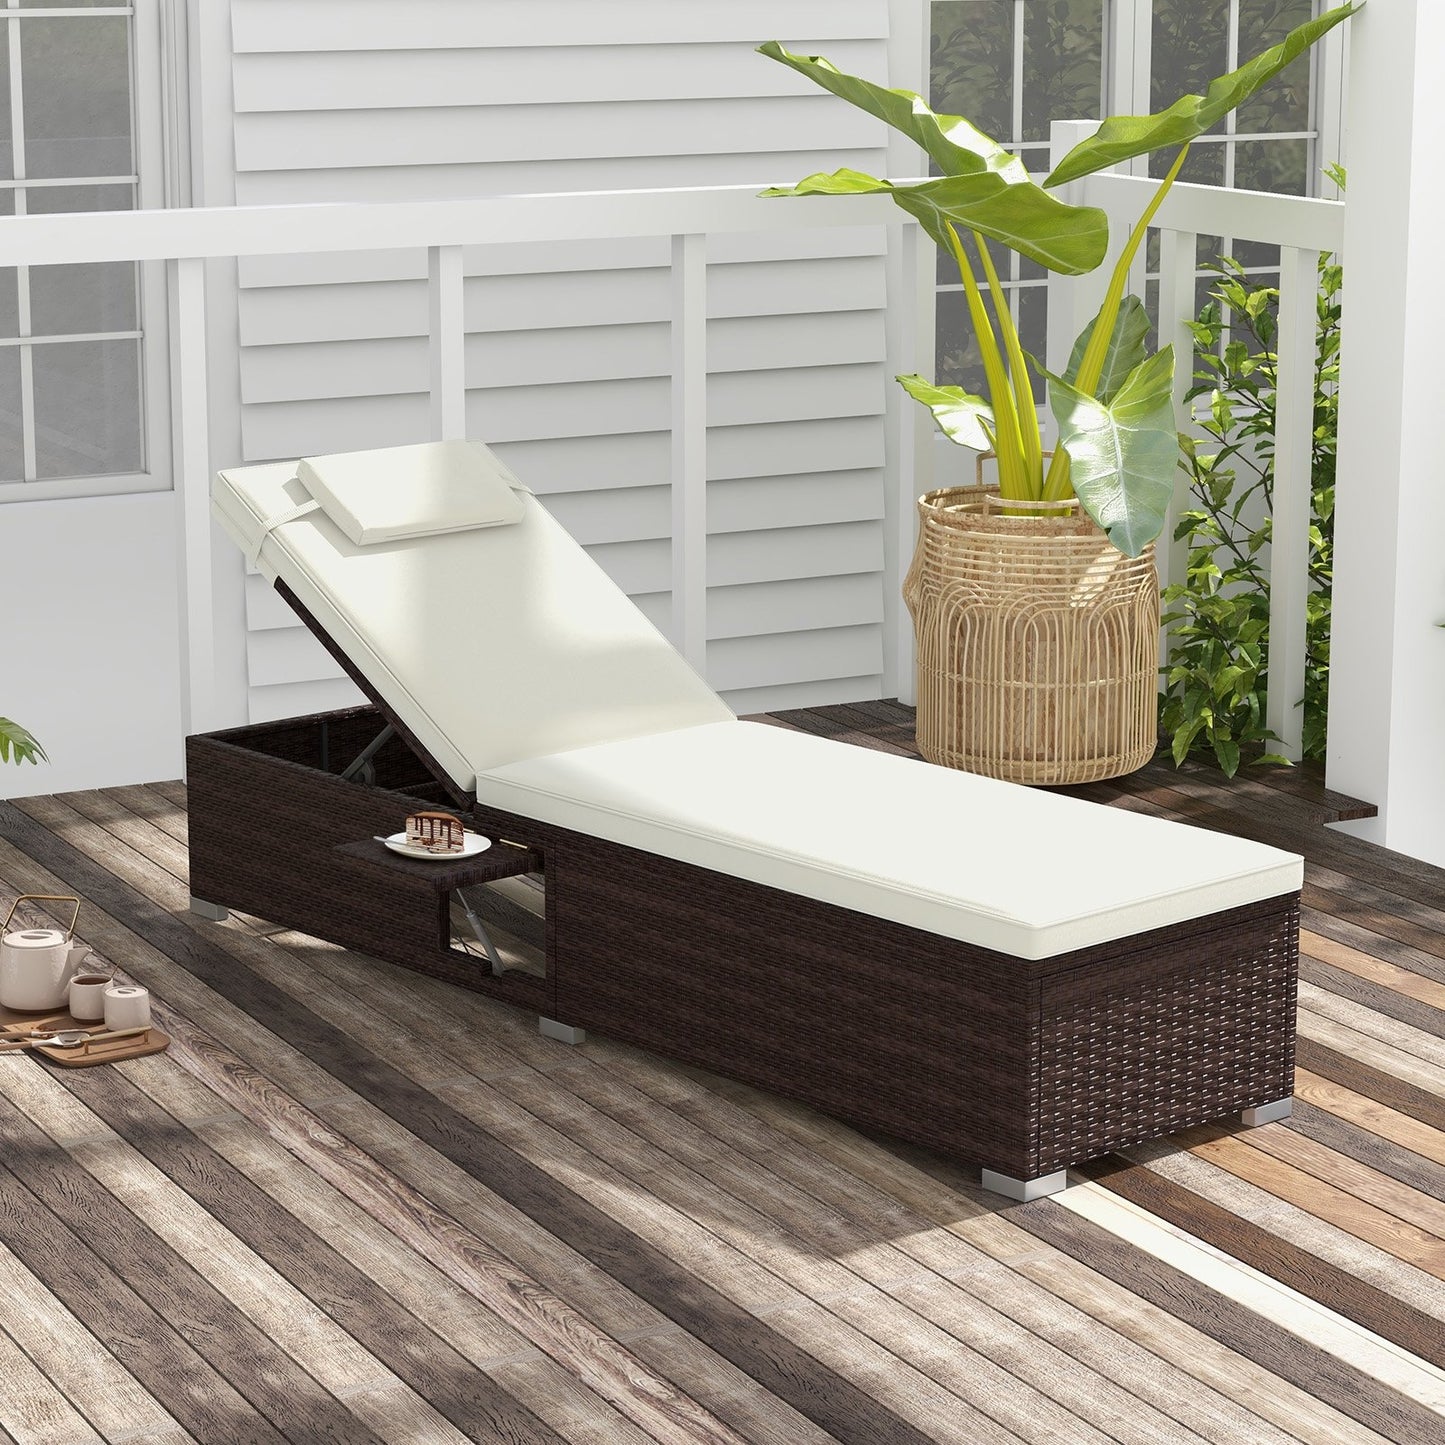 Outdoor PE RattanChaise Lounge with 6-level Backrest, Off White